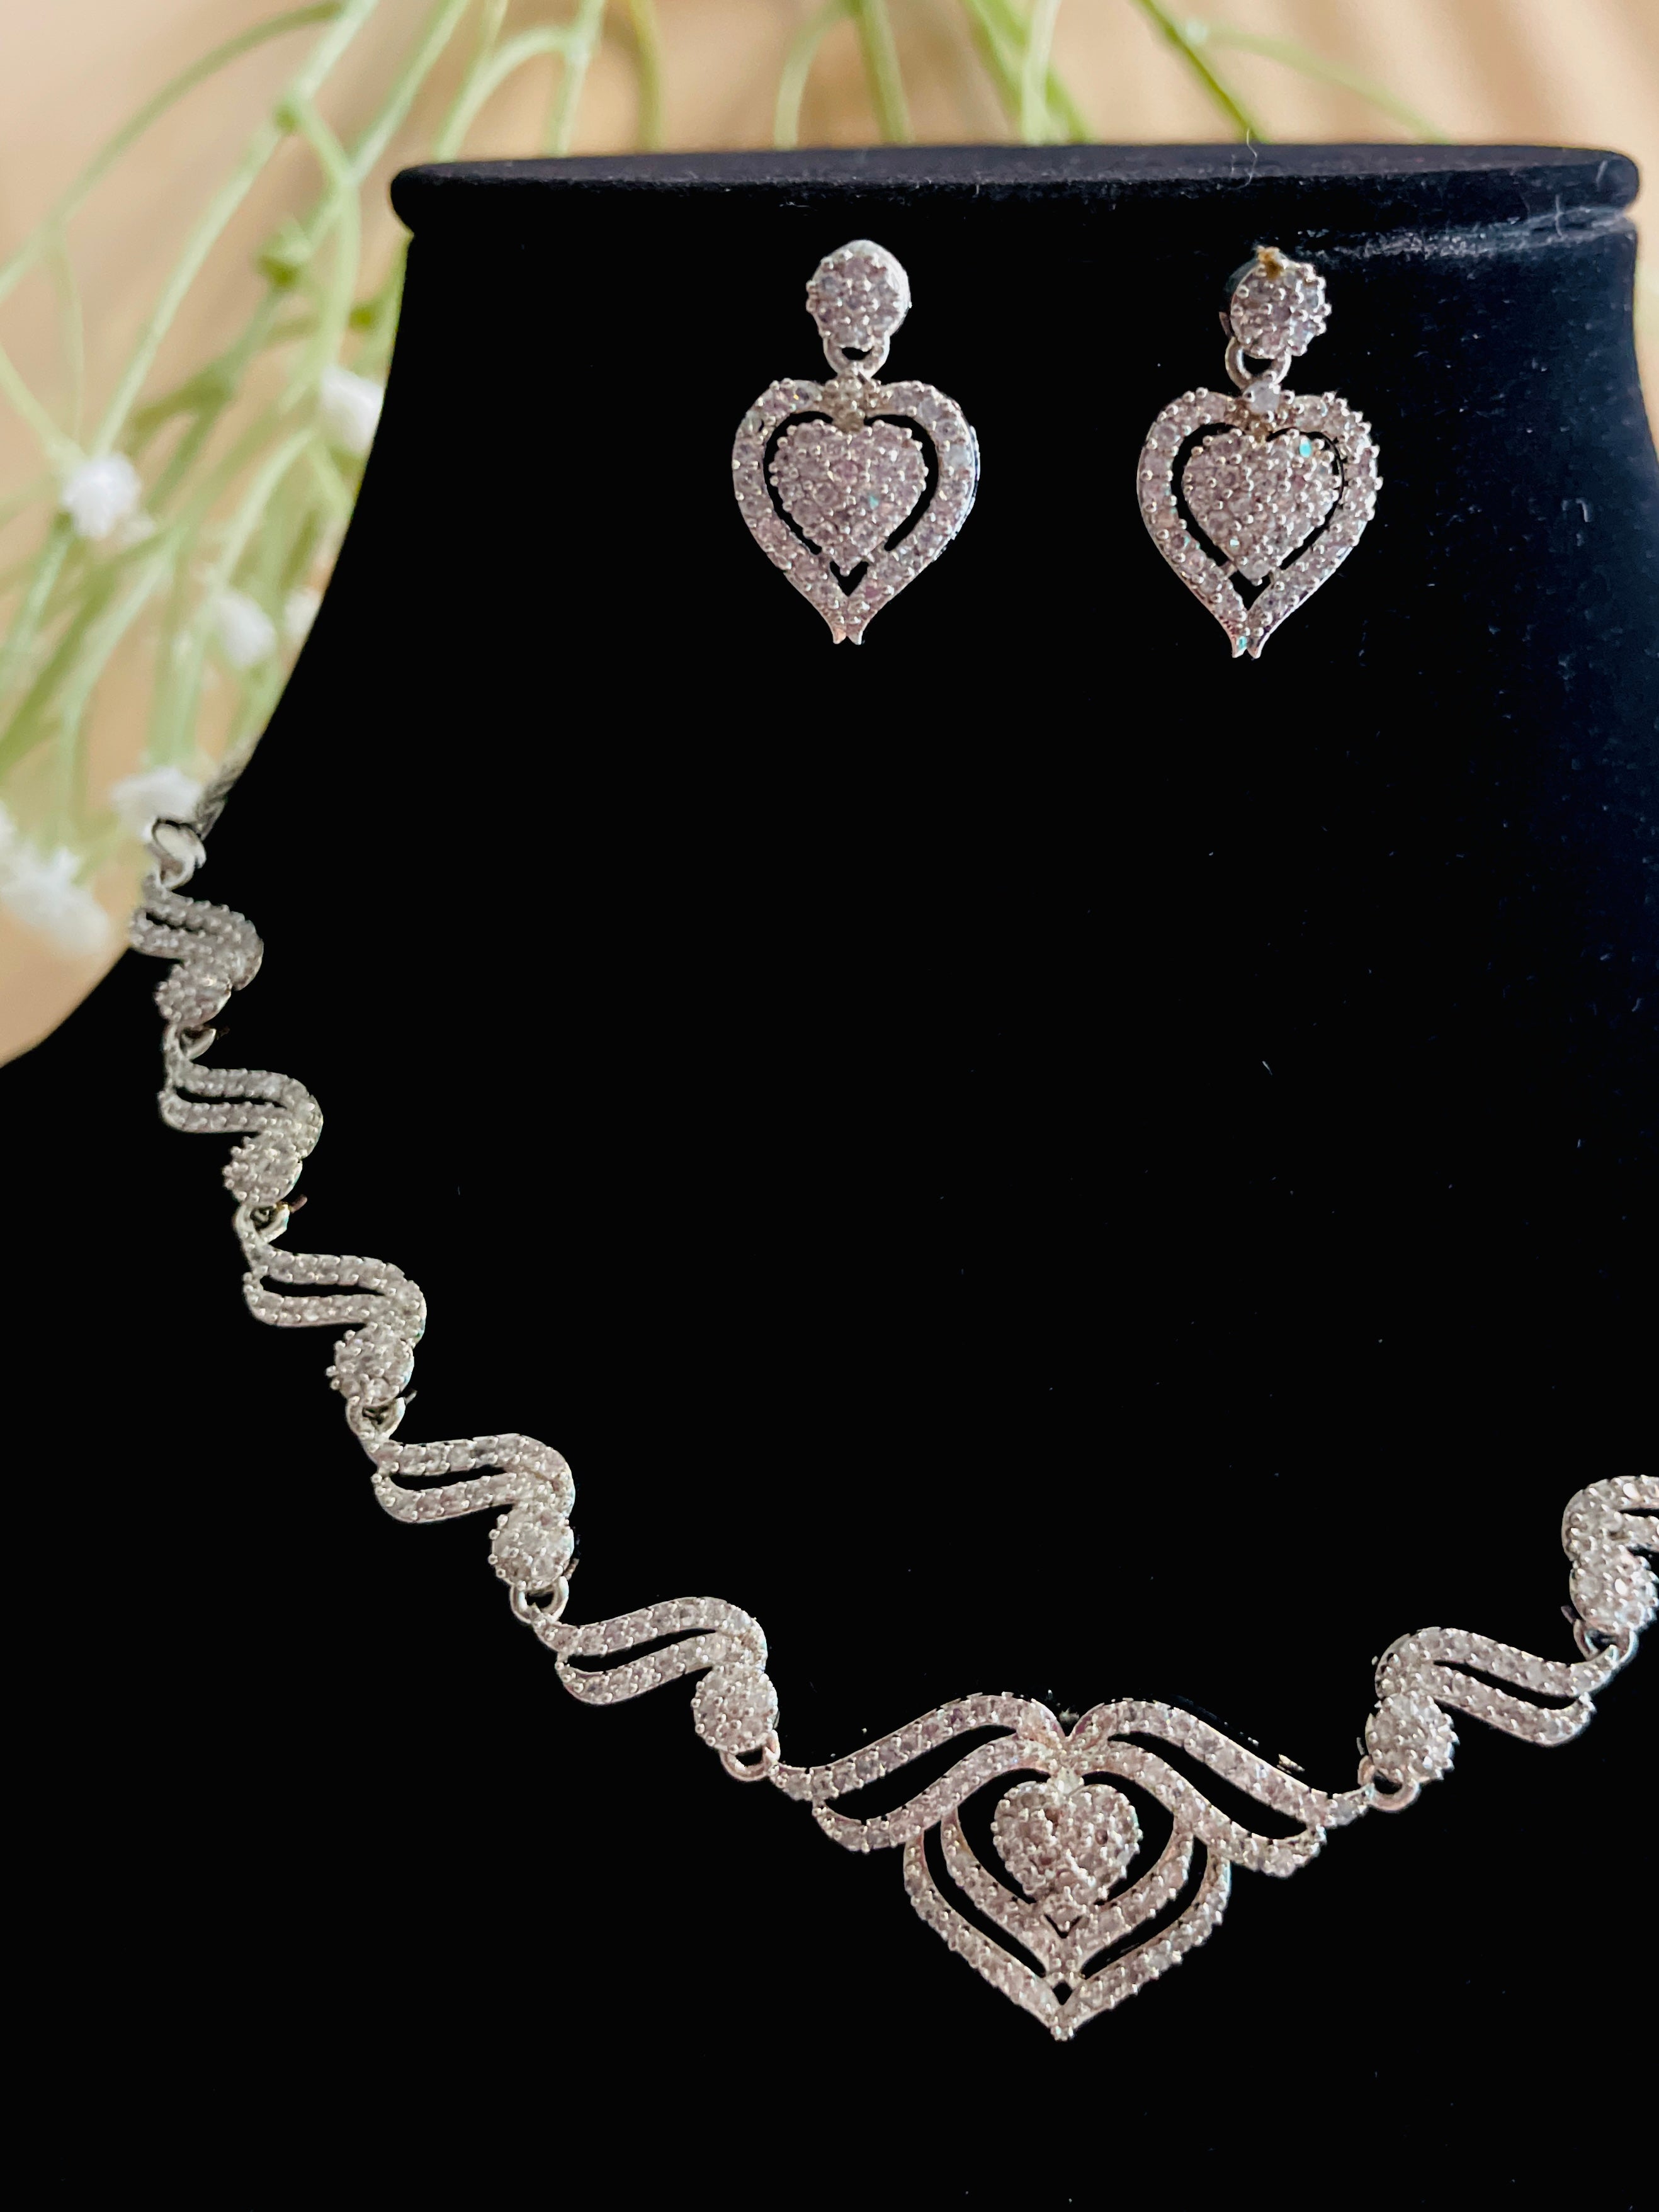 Valentine Queen of Hearts Necklace with Heart Drop Earrings